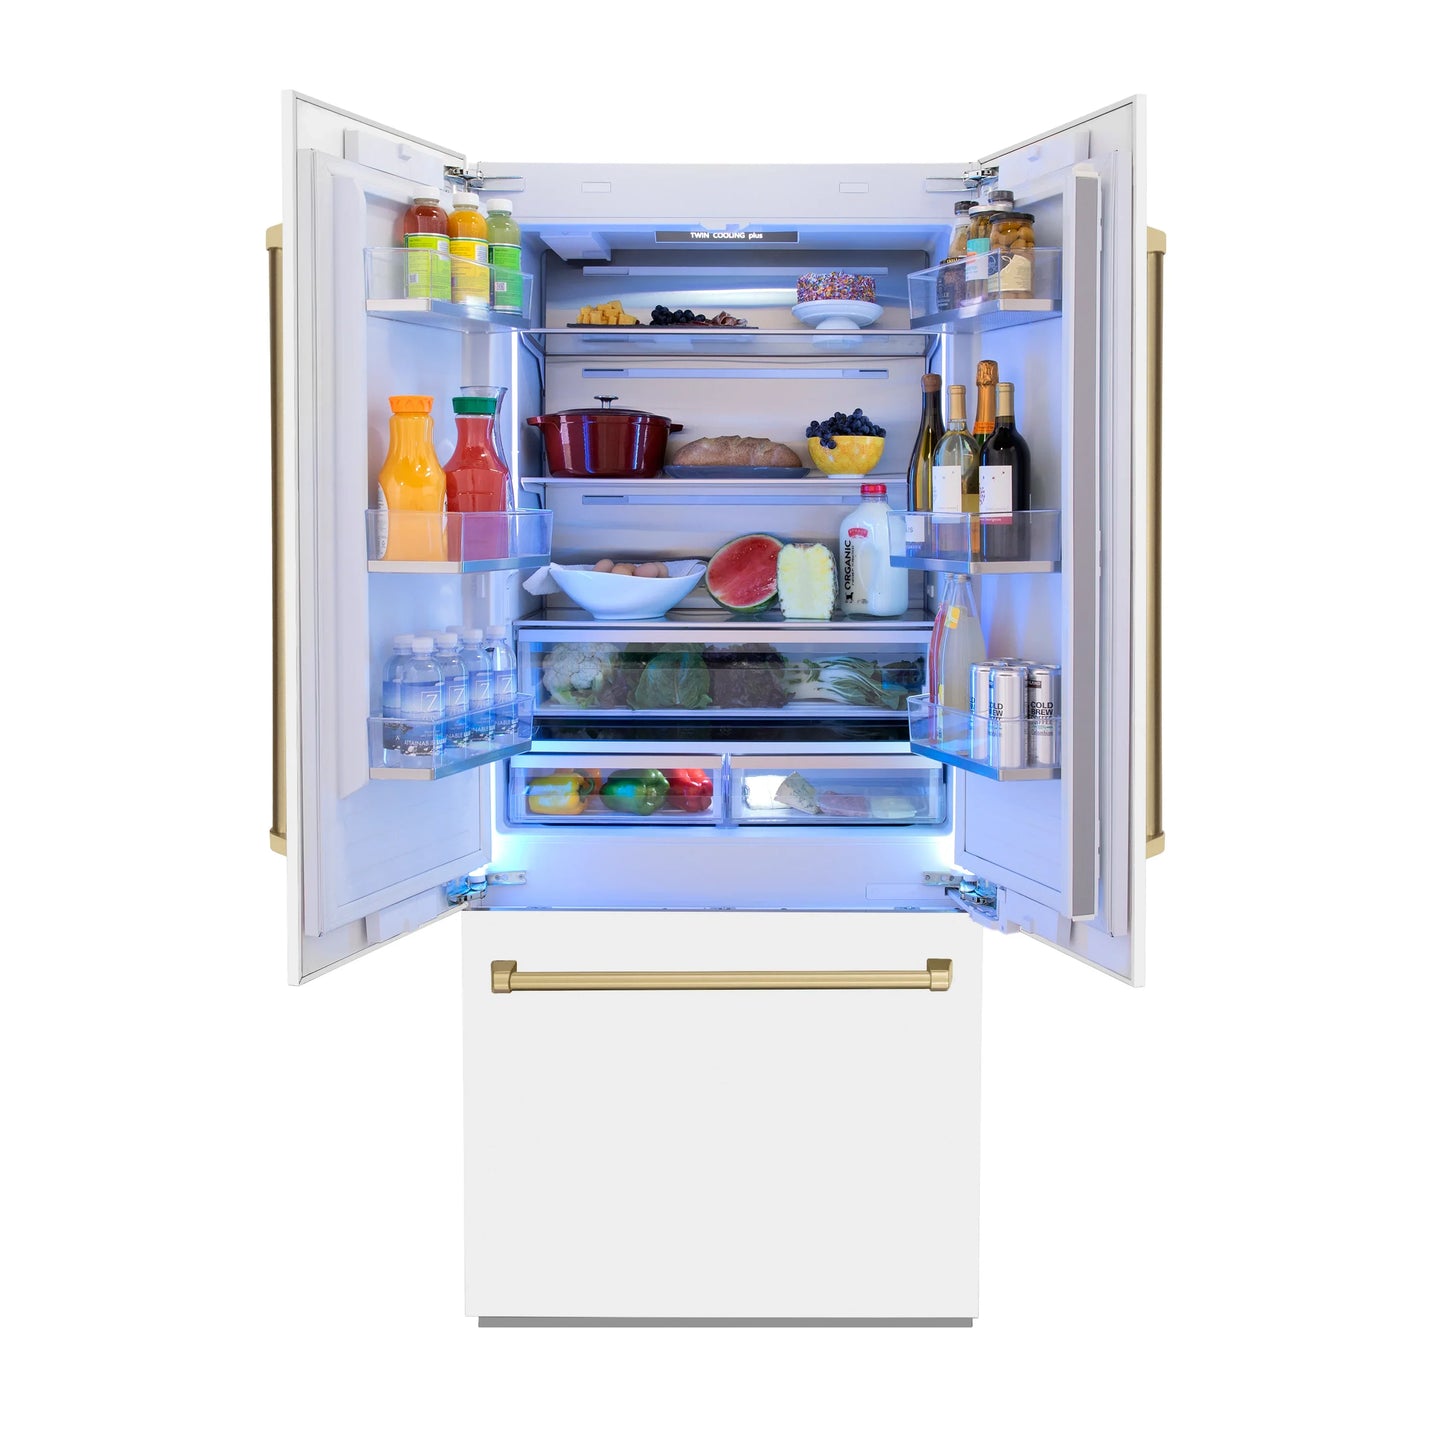 ZLINE 36 In. 19.6 cu. ft. Built-In French Door Refrigerator with Internal Water and Ice Dispenser in White Matte with Gold Accents, RBIVZ-WM-36-G